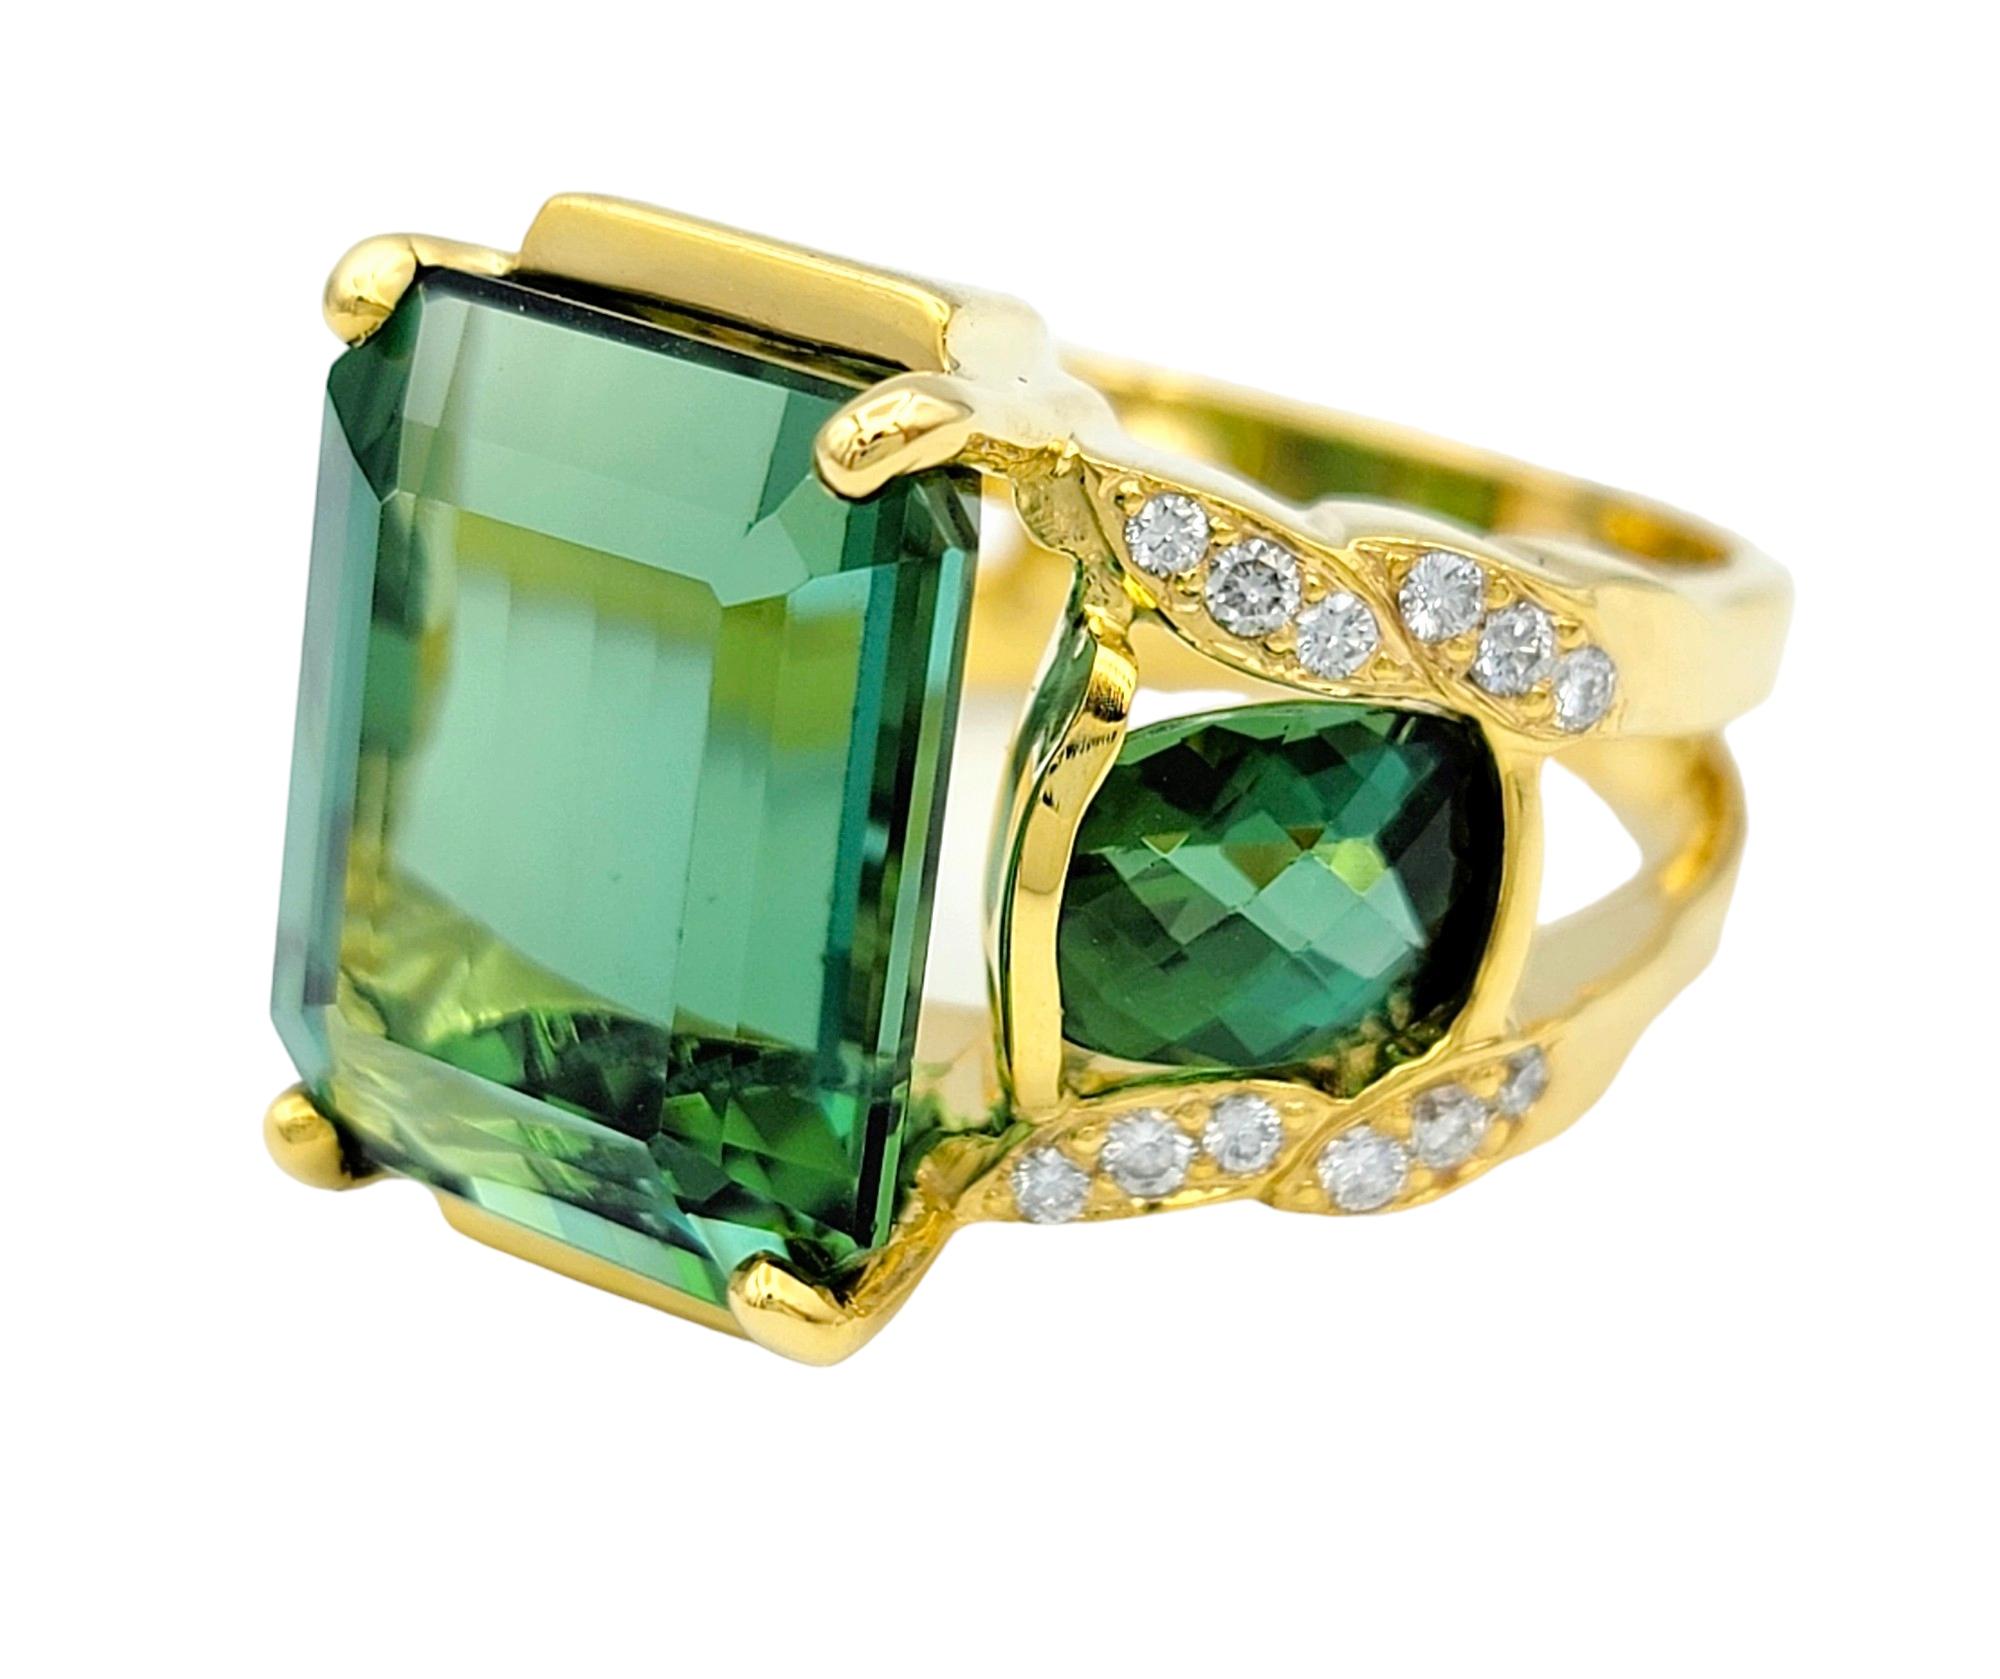 Emerald Cut Green Tourmaline 3 Stone Ring with Diamonds in 14 Karat Yellow Gold  In Good Condition For Sale In Scottsdale, AZ